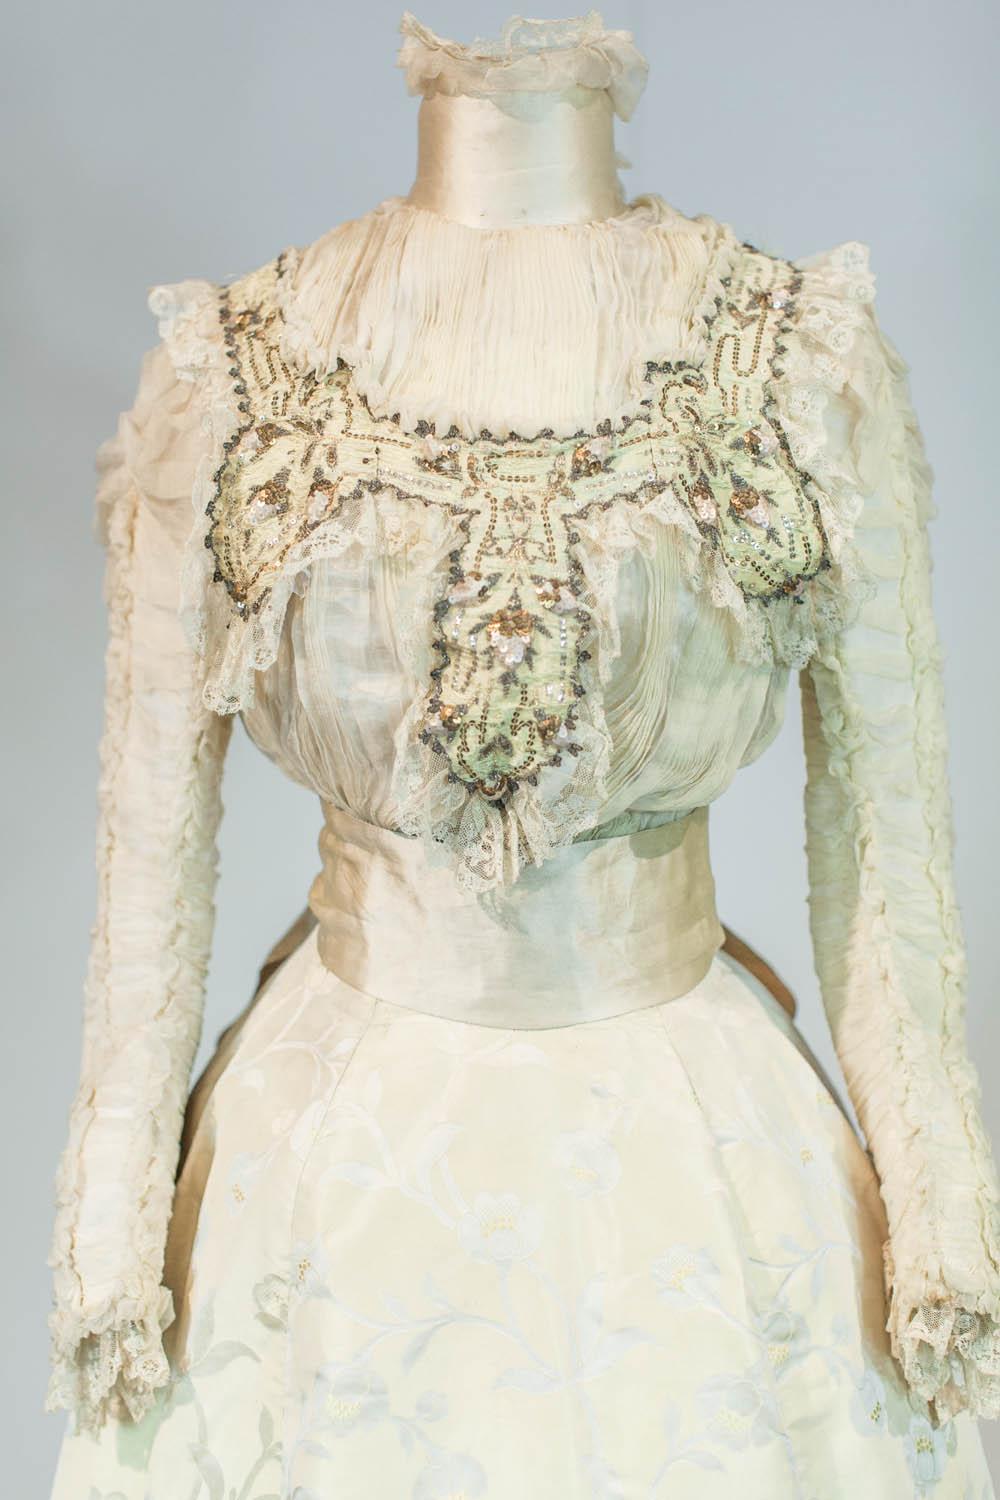 Circa 1895/1905
France 

Two-part ceremony nuptial dress (?), skirt and bodice, Japanese style dating from the Belle Epoque. High-waisted corset with a label woven on the waistband indicating Mademoiselle Tessier St Etienne. Cream satin background